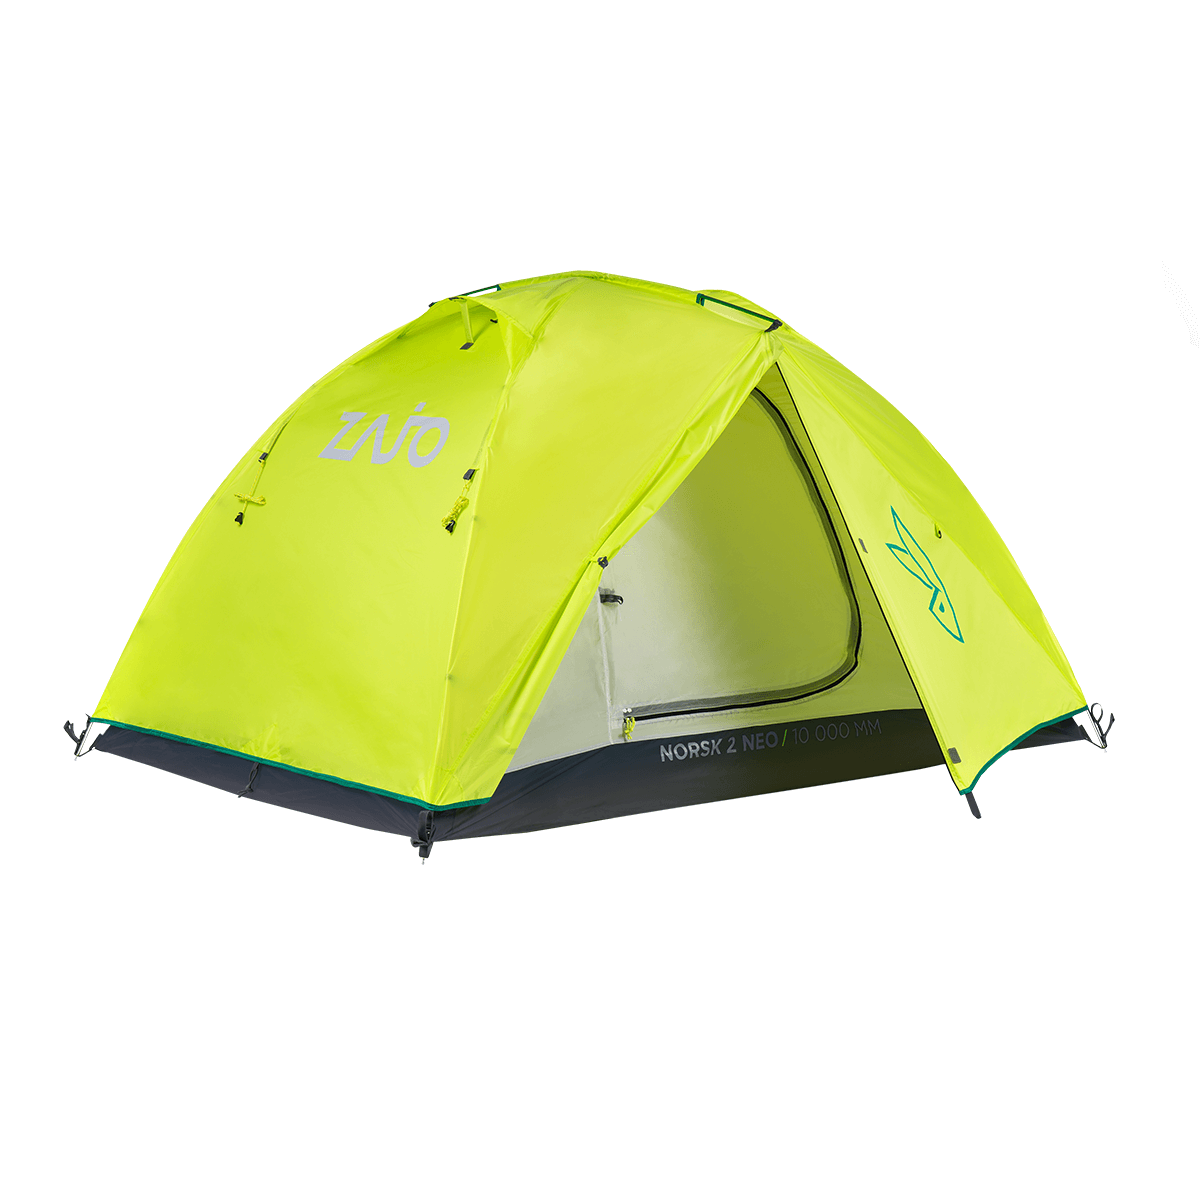 Stany Zajo Norsk 2 Neo Tent